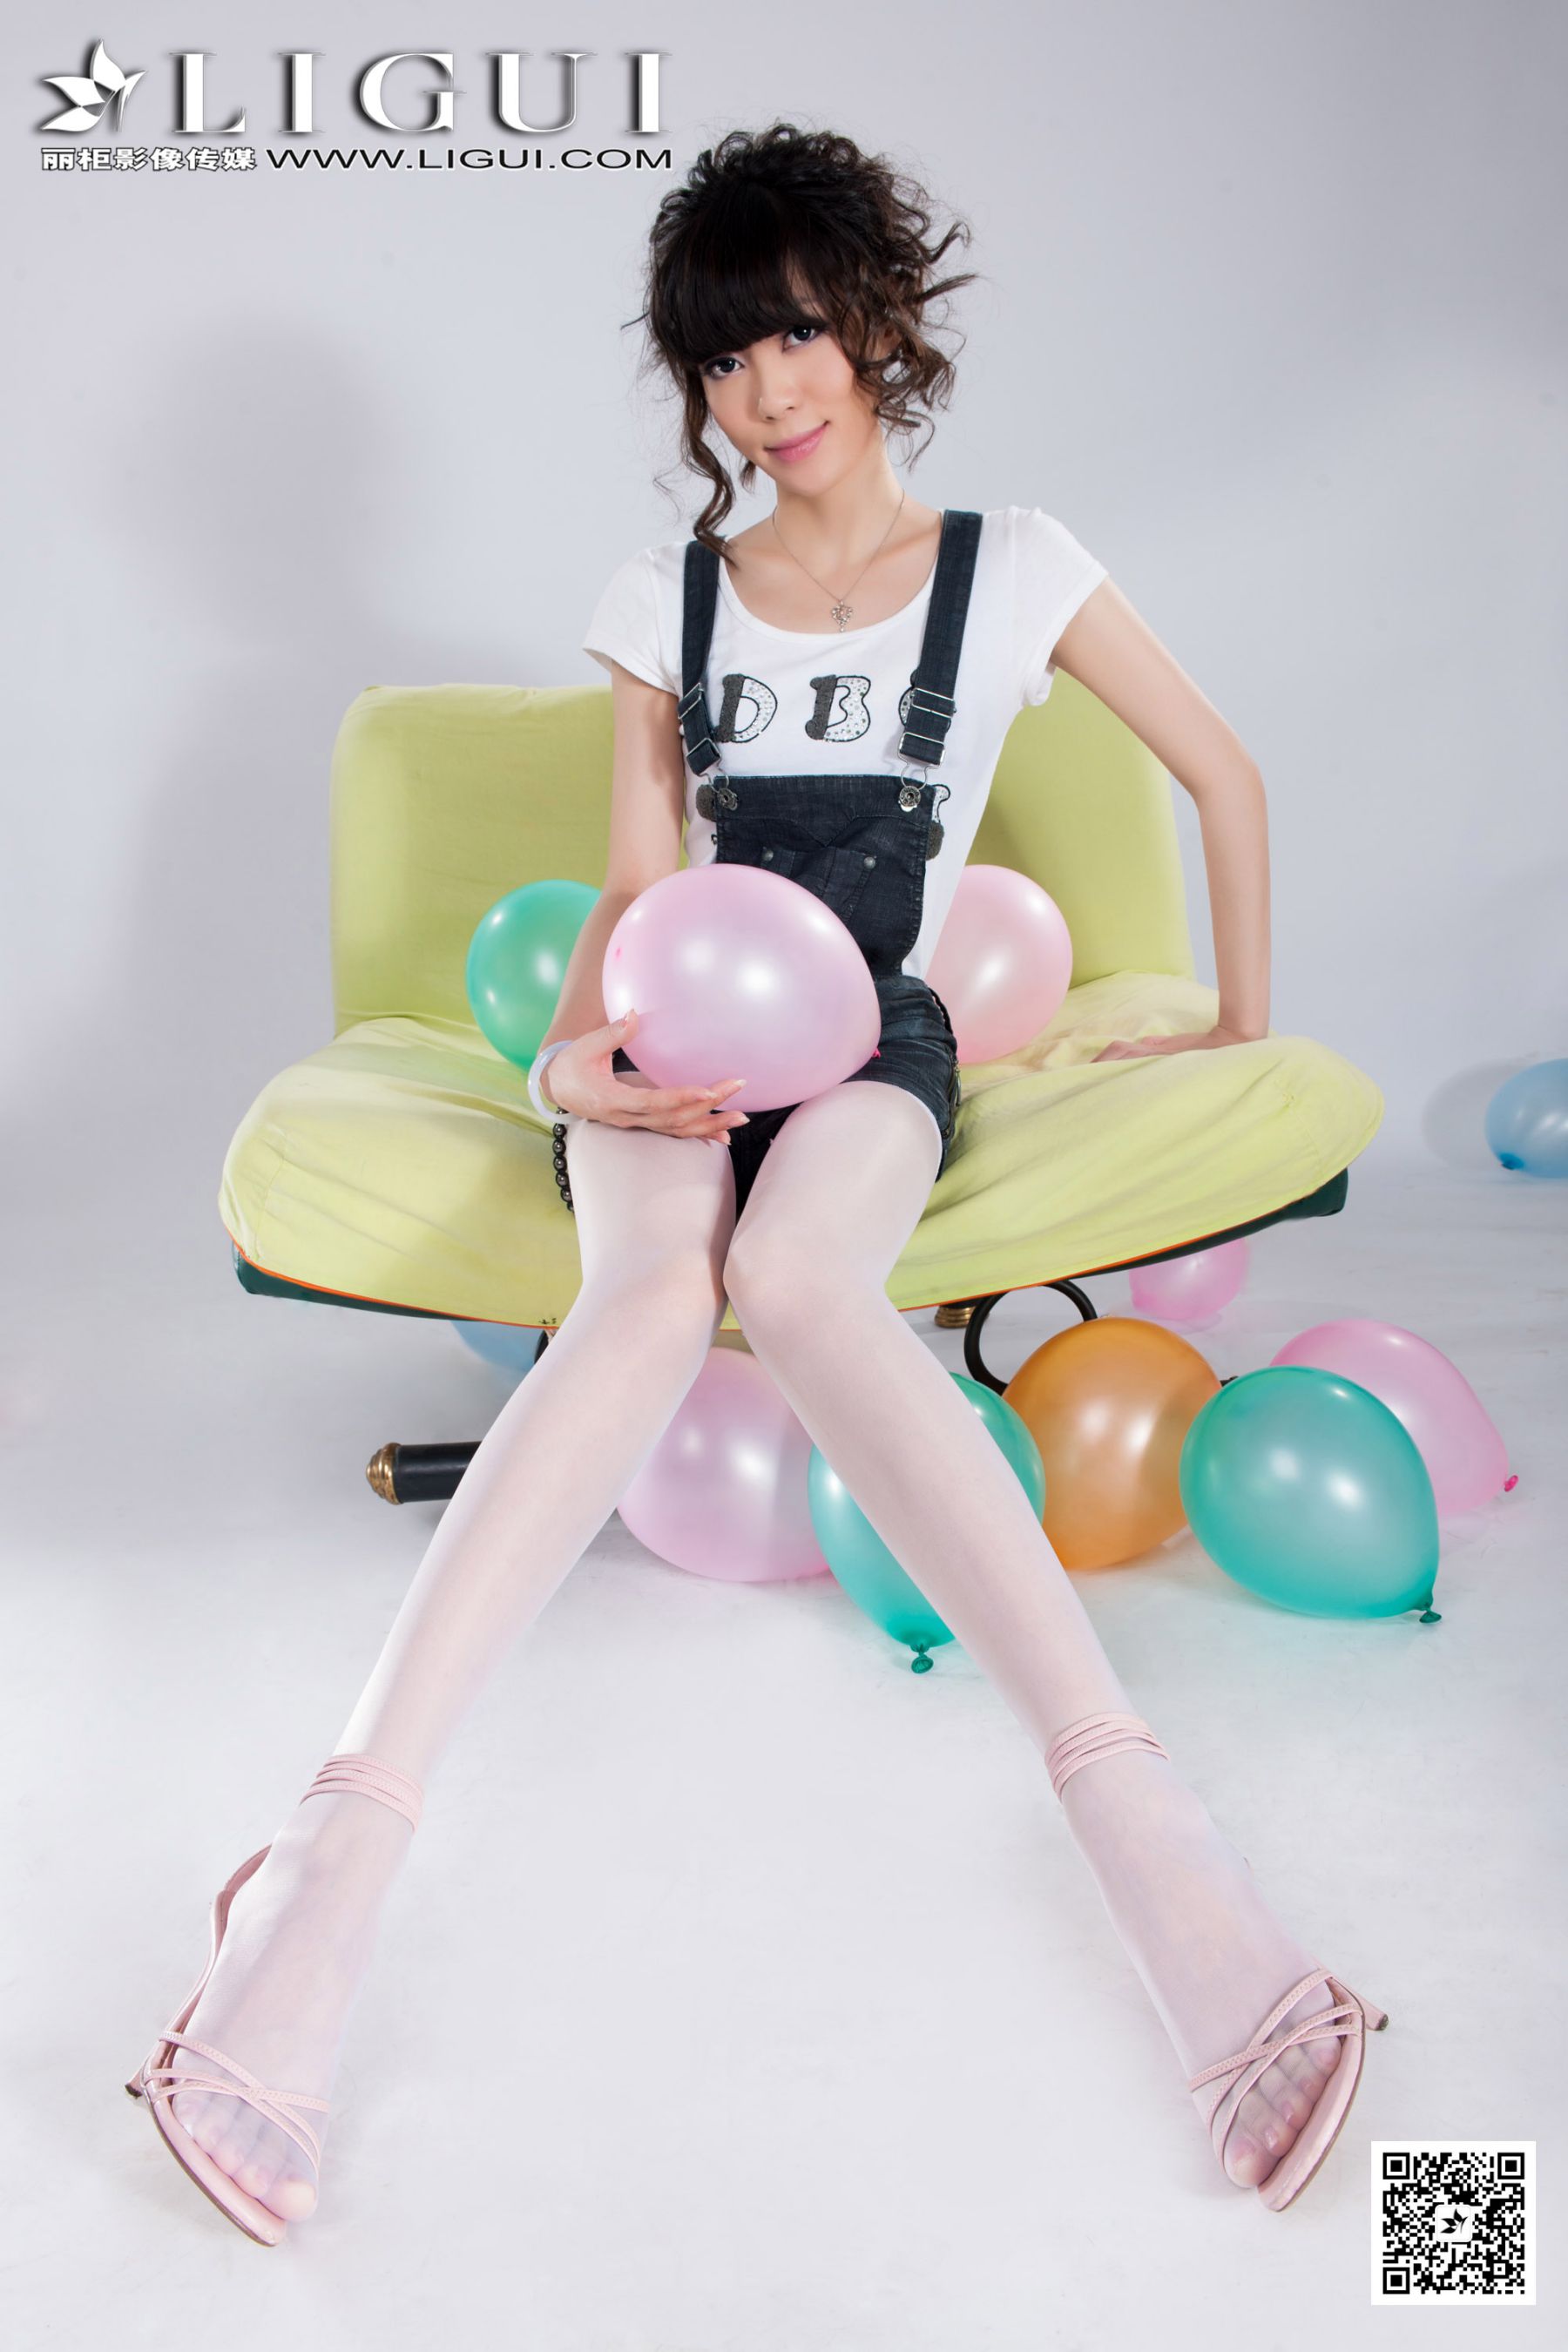 Model Lele "Cute Strap Denim + White Silk High Heel" Complete Works of Upper Middle and Lower [丽柜LiGui] Beautiful legs and jade feet photo Page 74 No.5f0b5c